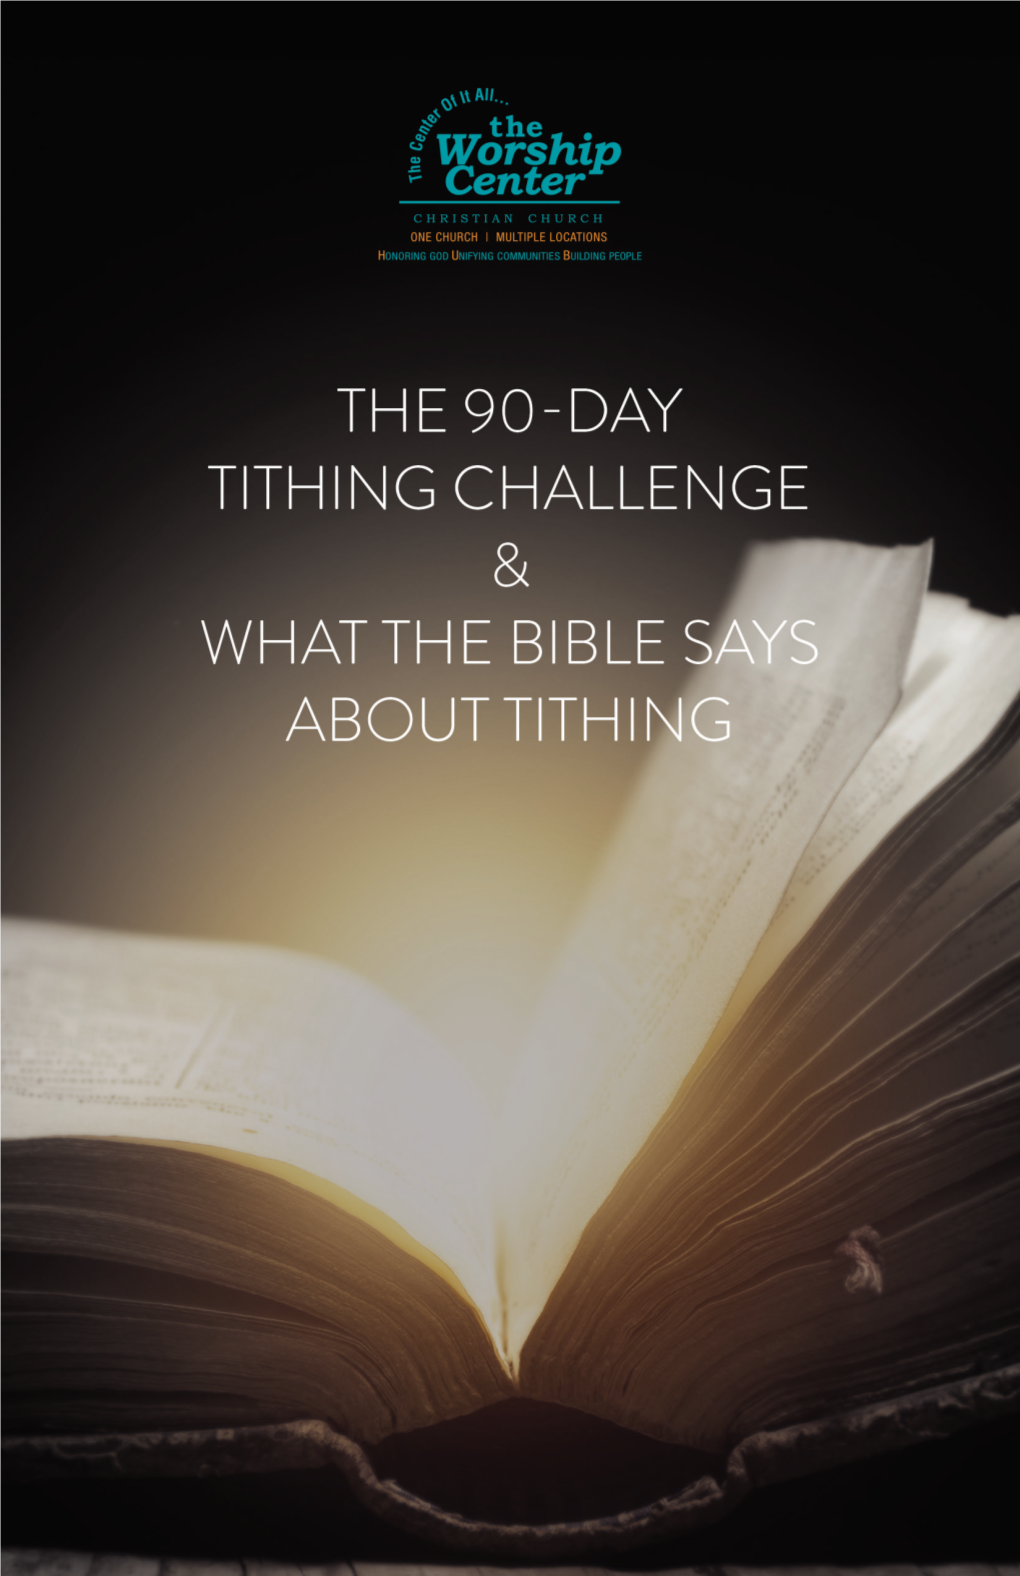 What Is the 90-Day Tithing Challenge?